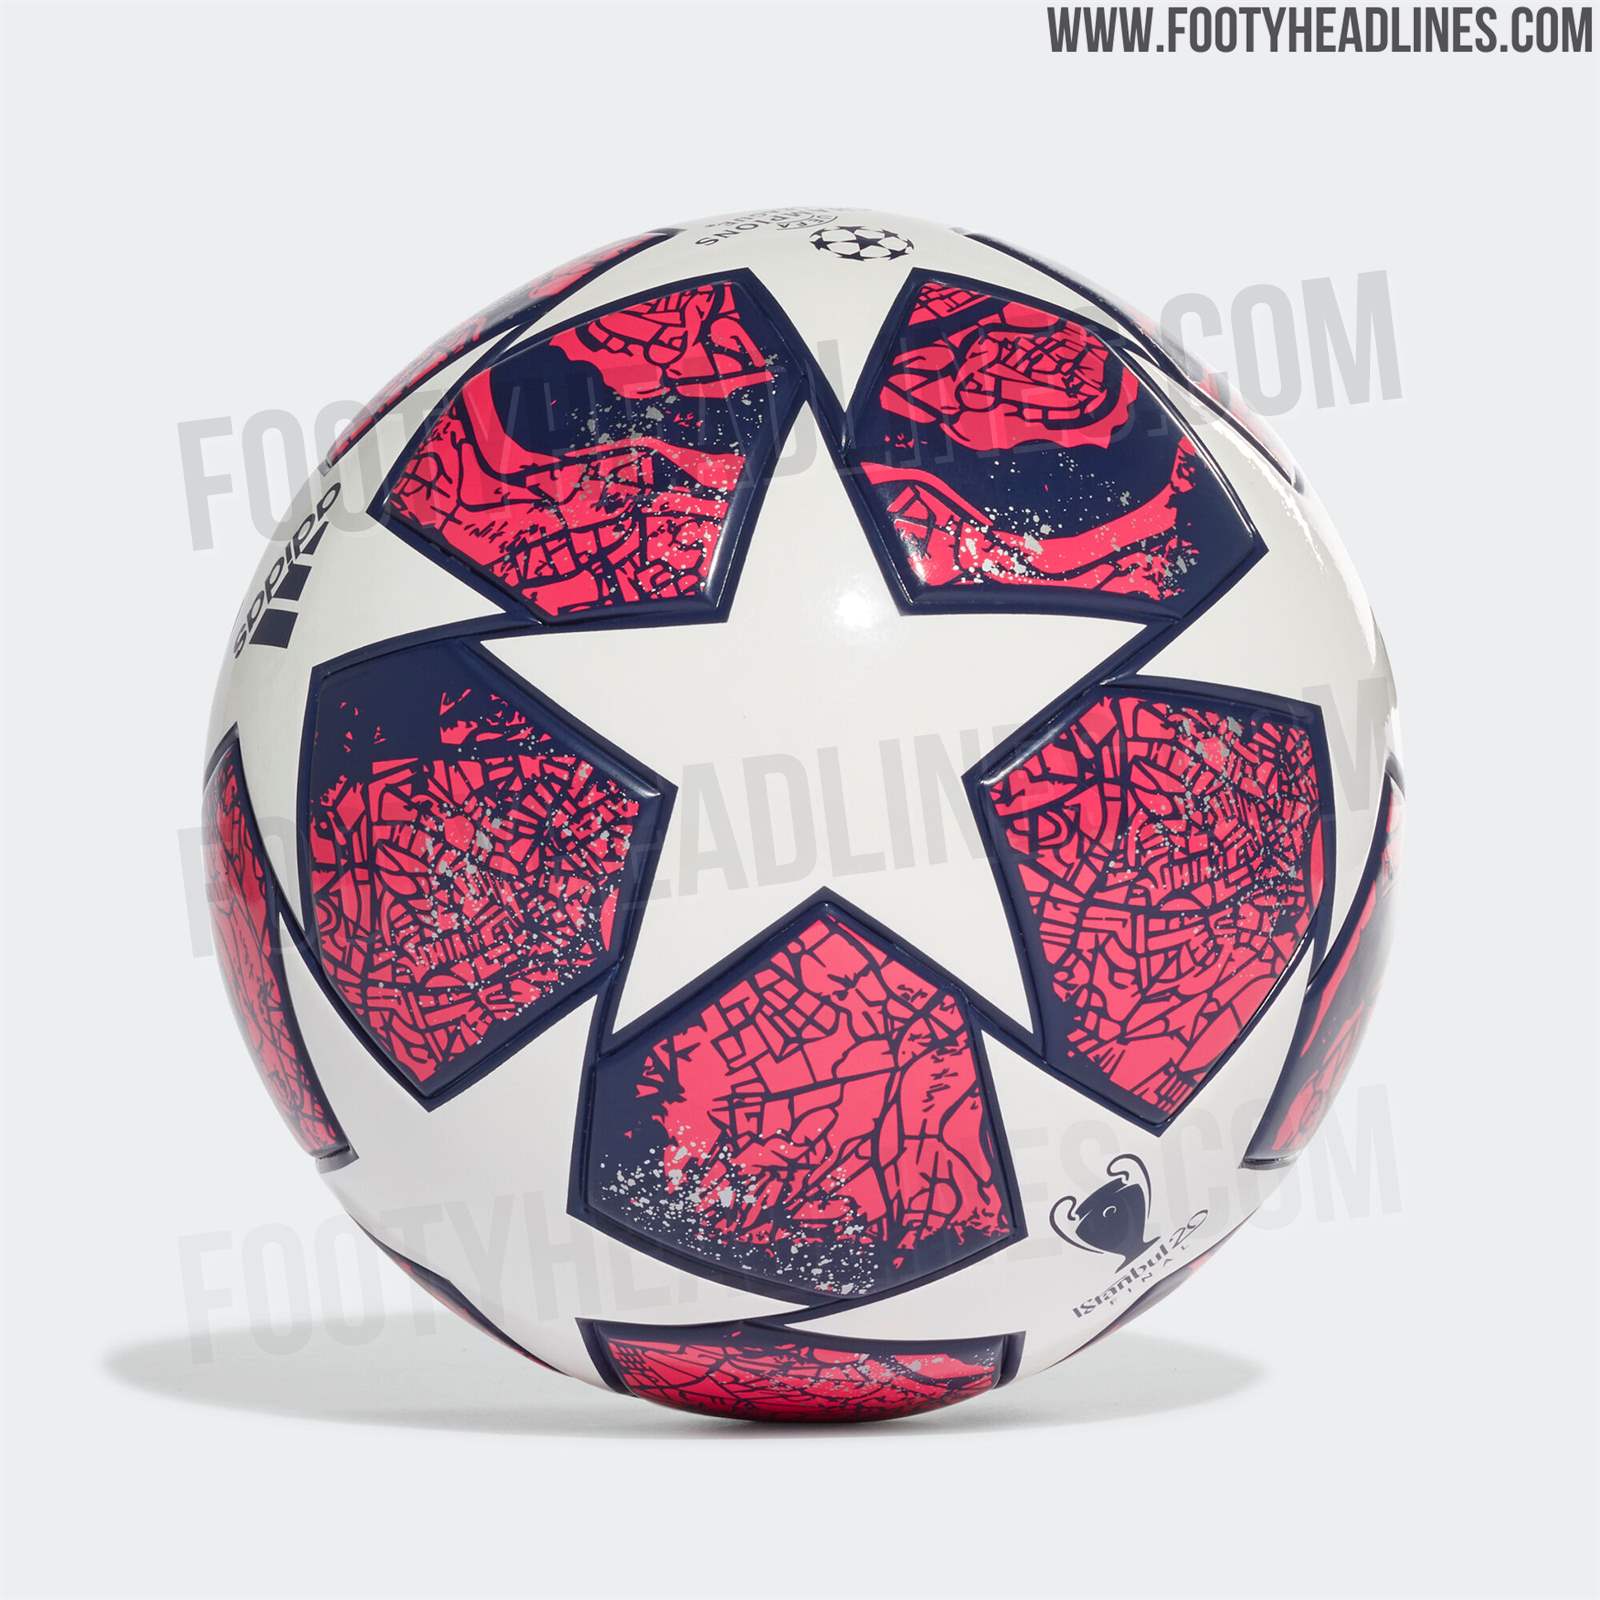 Spectacular Adidas 2020 Champions League Final Istanbul Ball Revealed